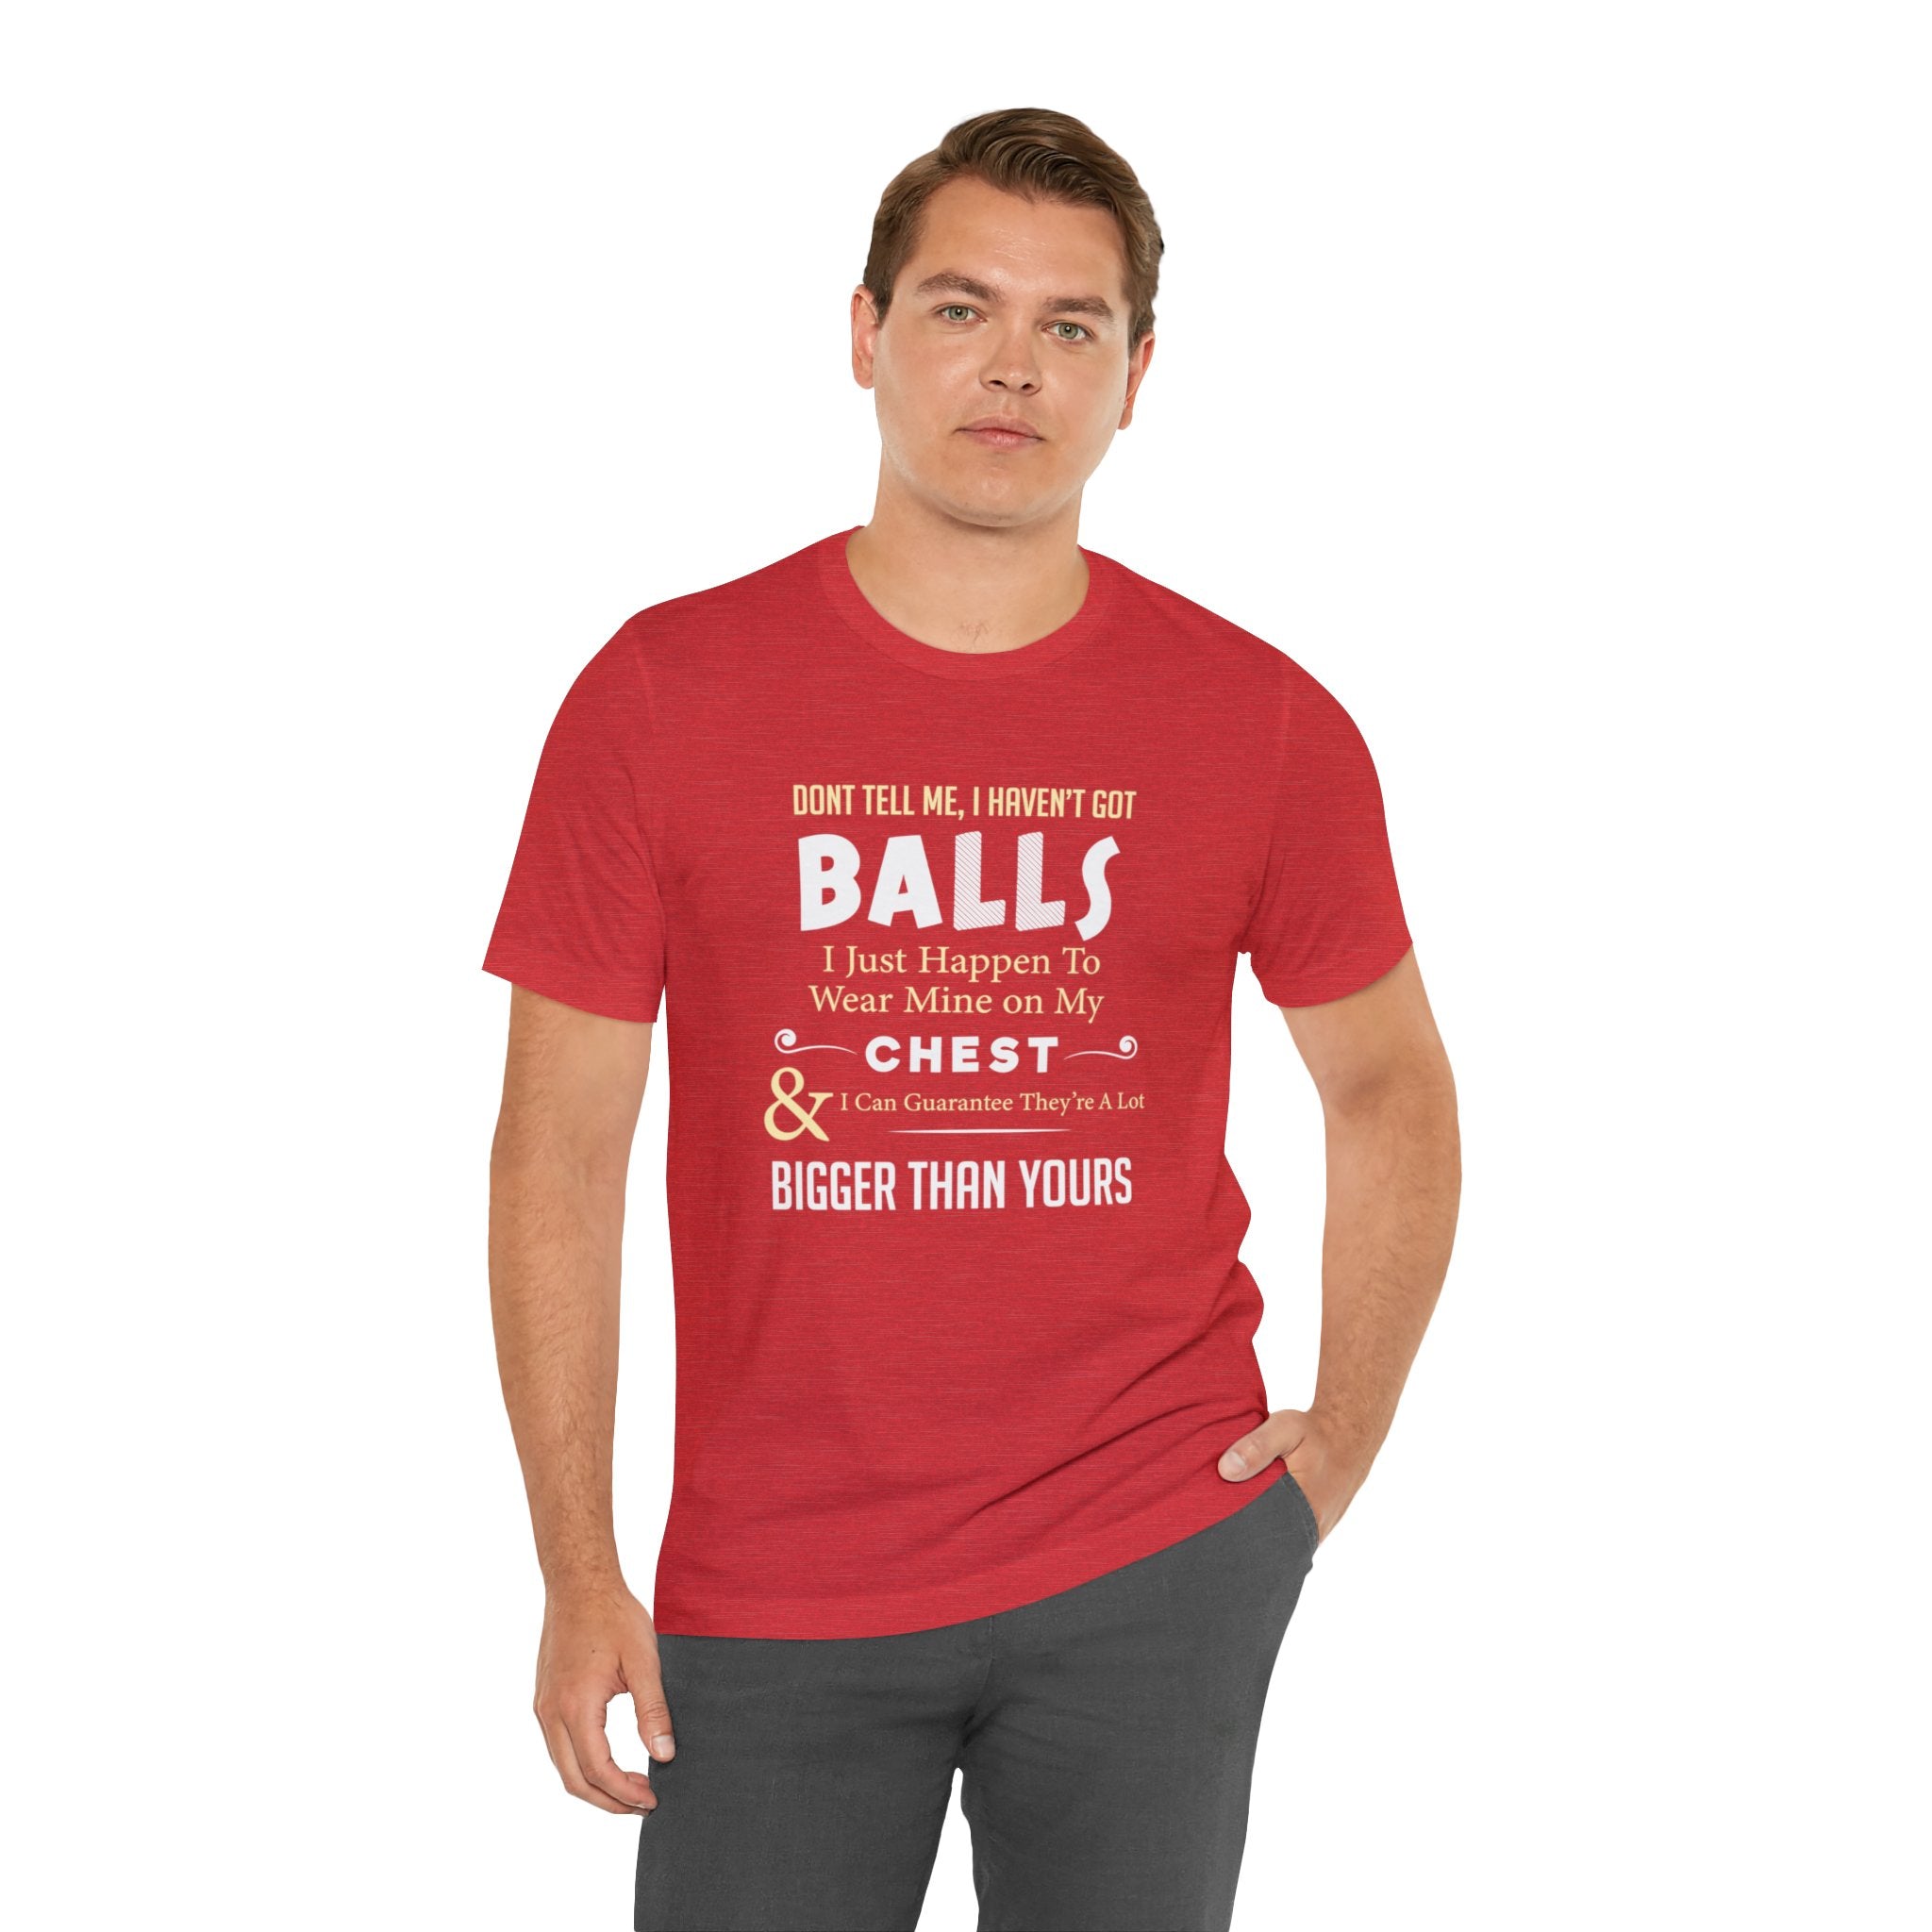 A man wearing a Bigger Than Yours t-shirt that says balls are christ, making an ultimate fashion statement.